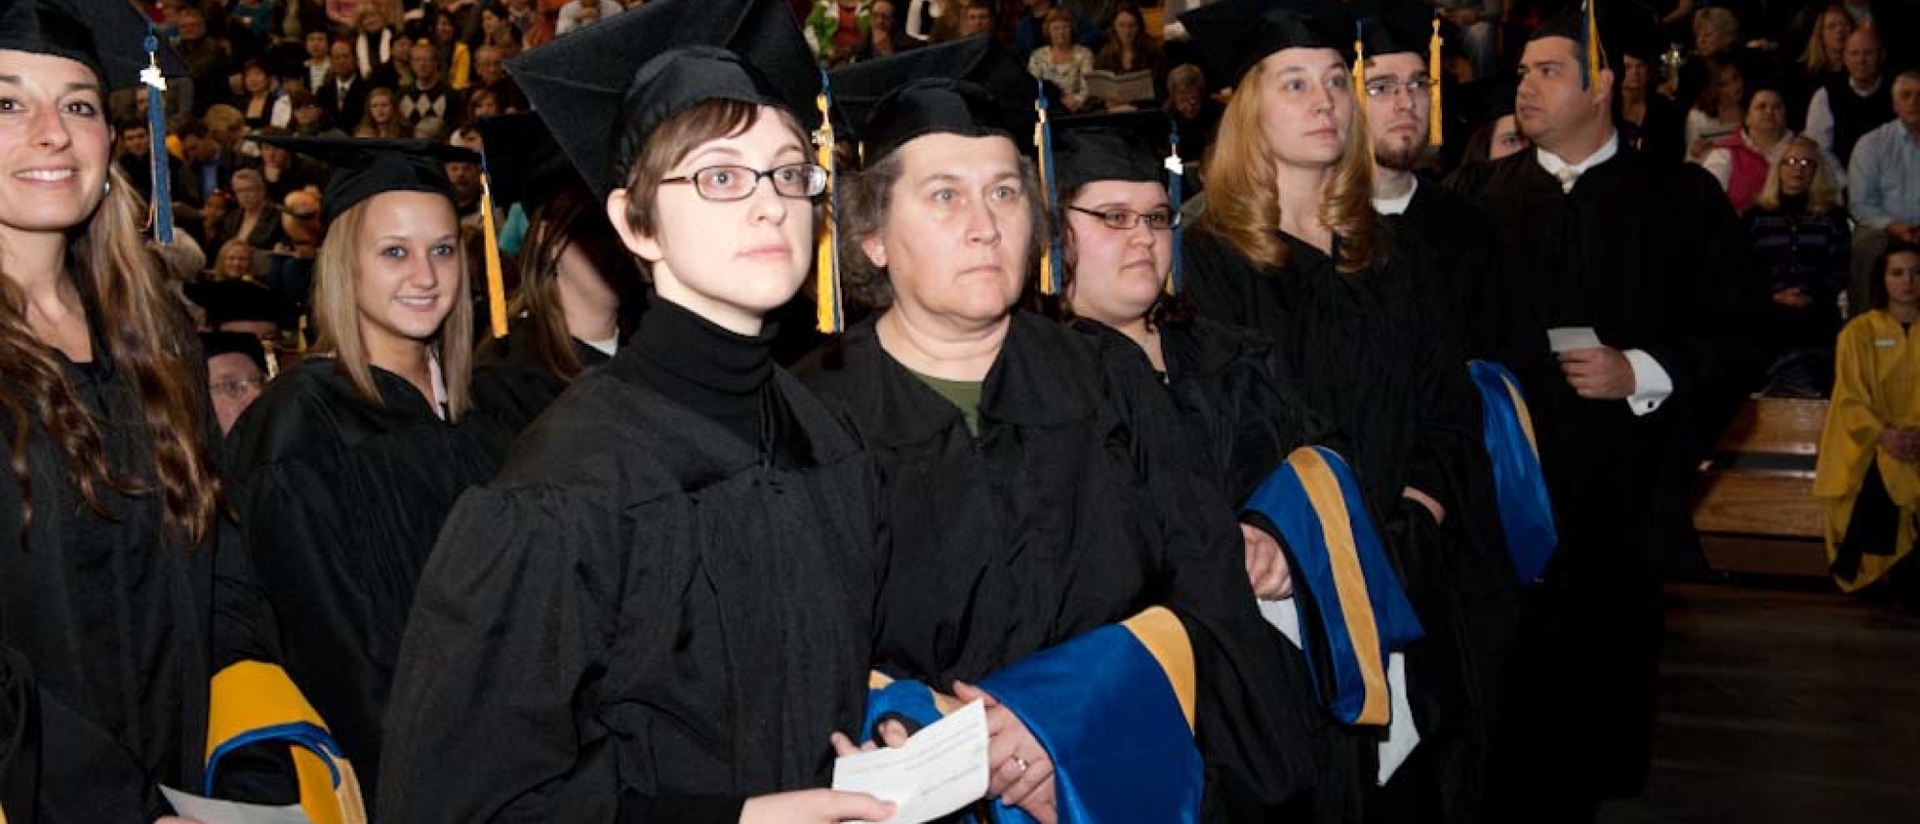 Graduate students at commencement